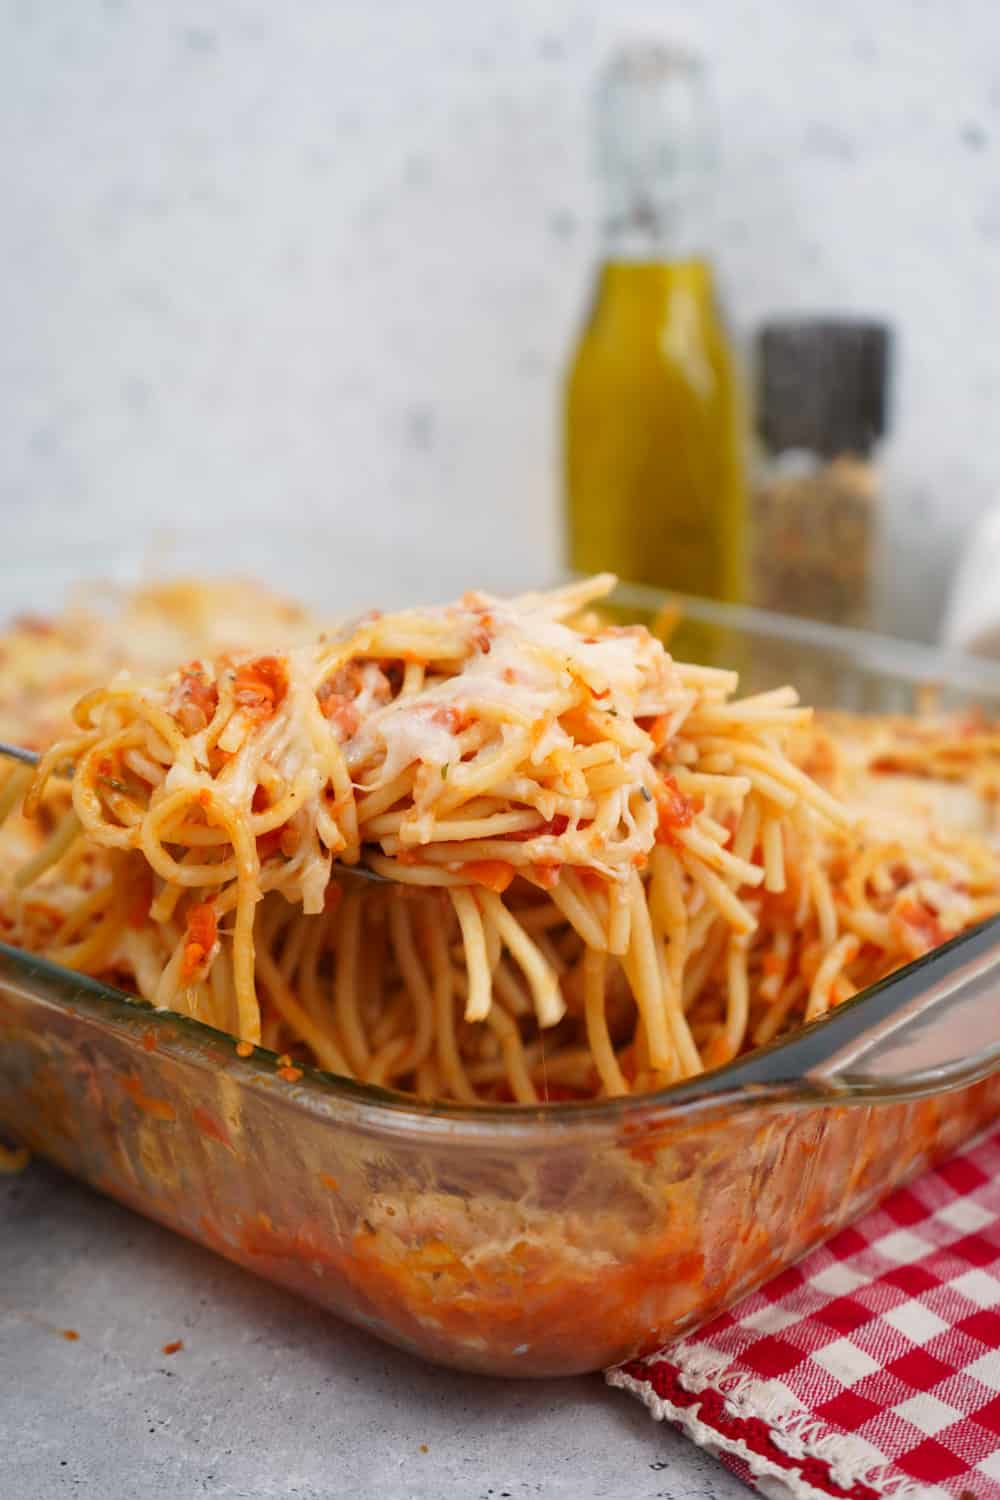 Baked Spaghetti being served